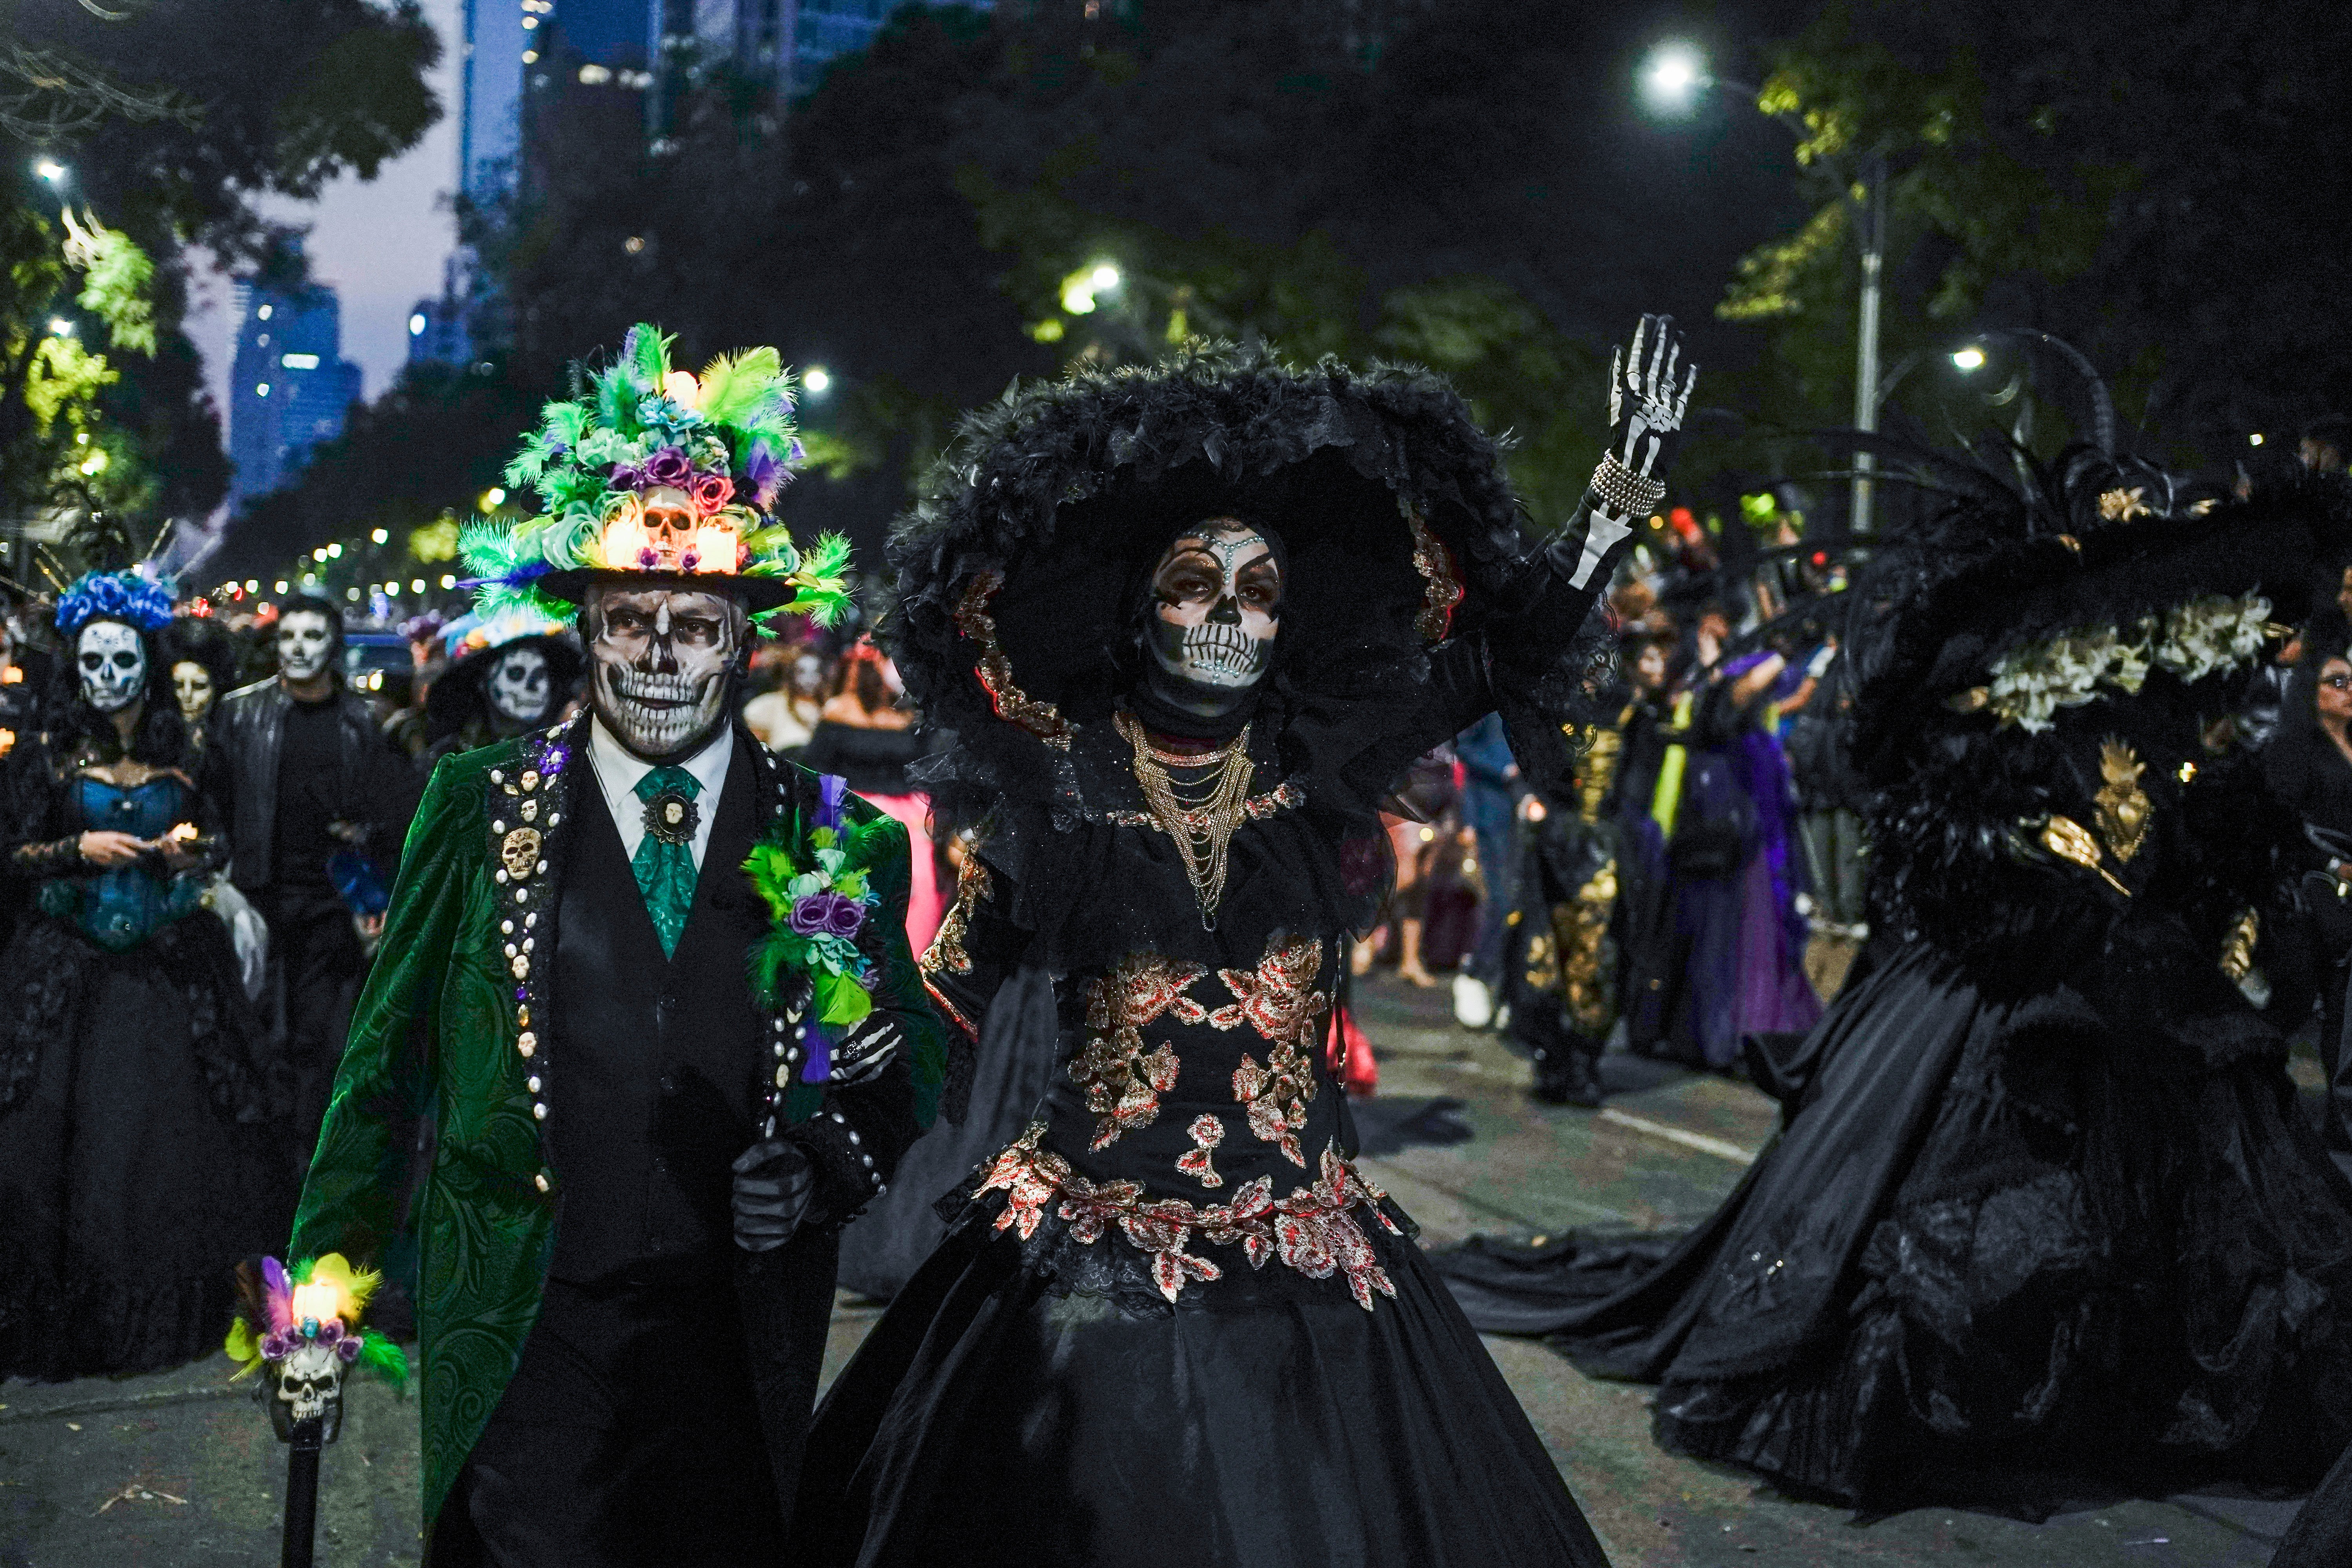 Revellers celebrating Day of the Dead in Mexico City